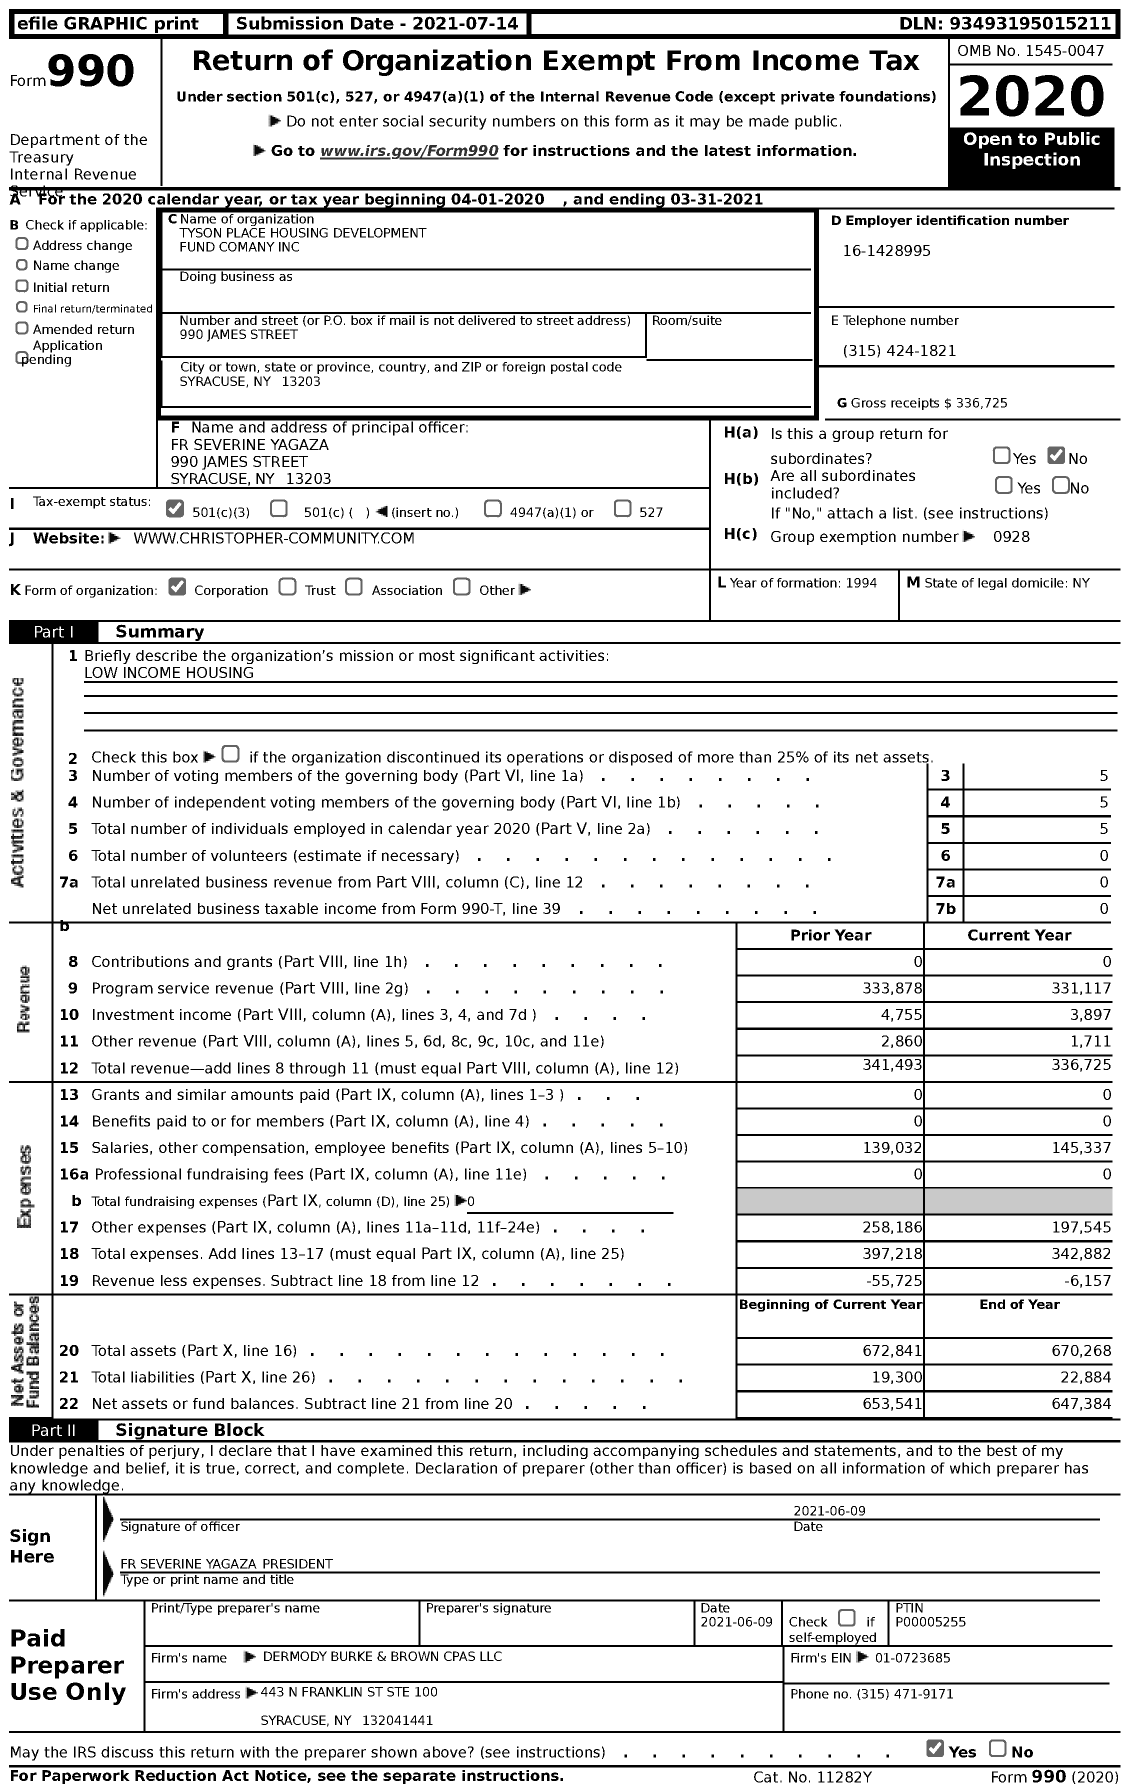 Image of first page of 2020 Form 990 for Tyson Place Housing Development Fund Company